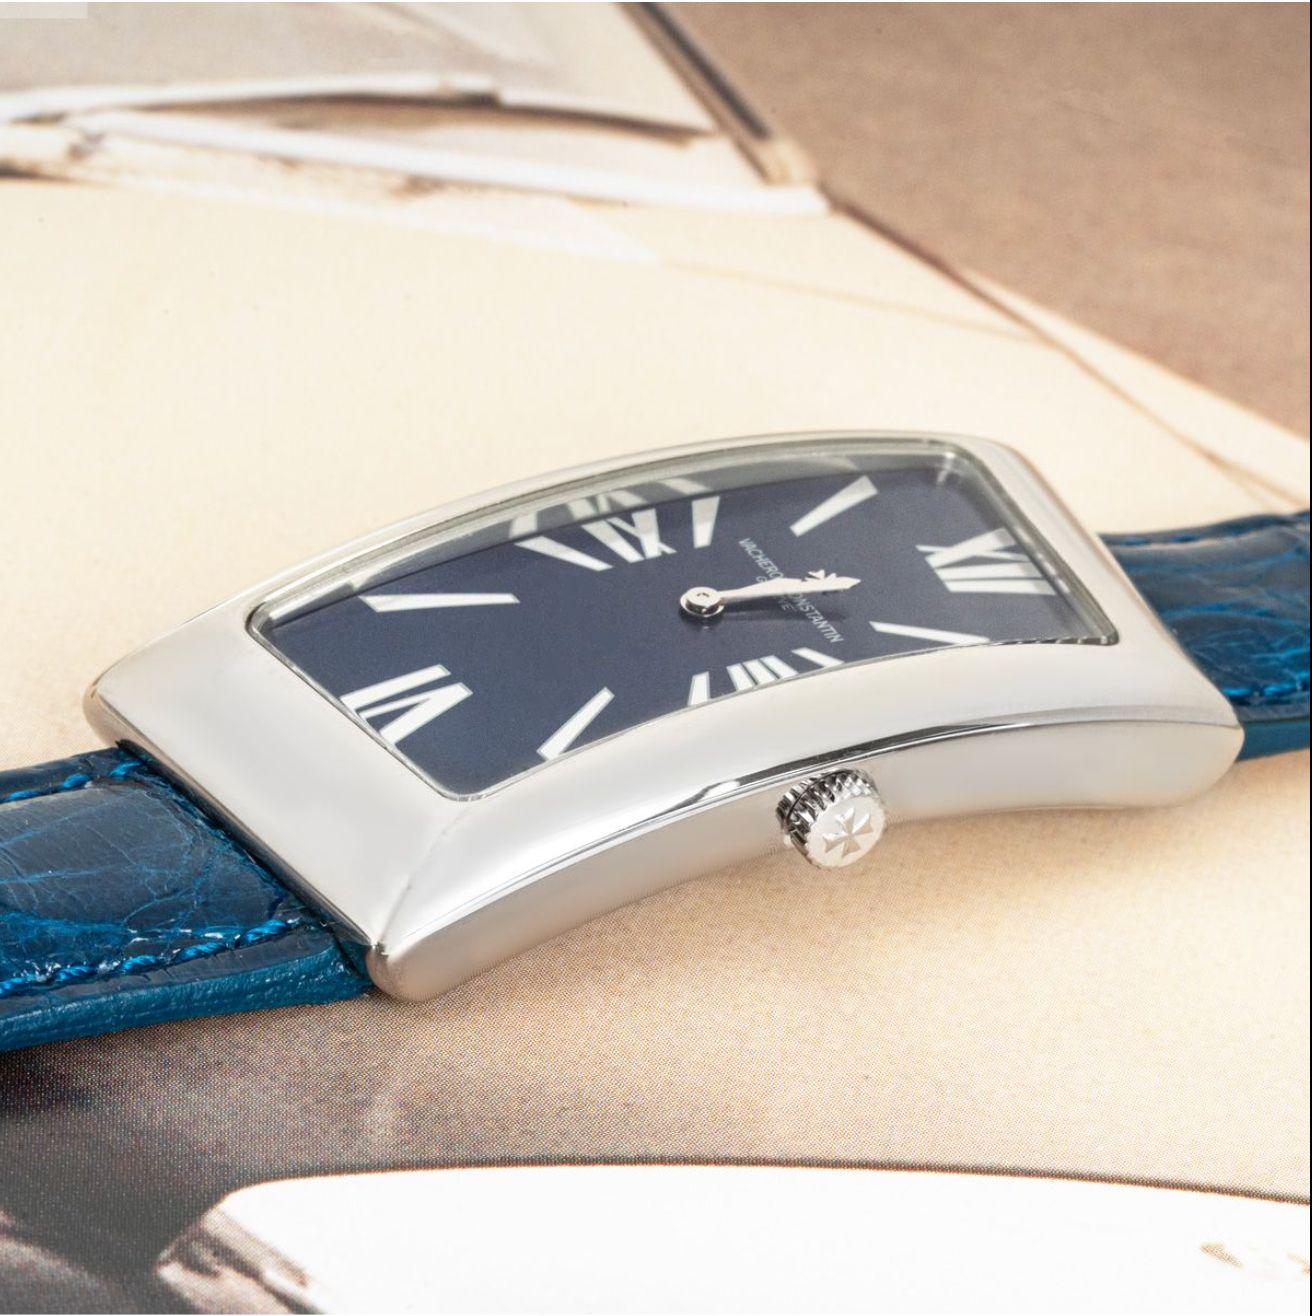 A rare white gold Asymmetric wristwatch by Vacheron Constantin. Featuring a distinctive blue dial with roman numerals and a white gold bezel. Fitted with a sapphire glass, a quartz movement and a generic leather strap set with an original white gold